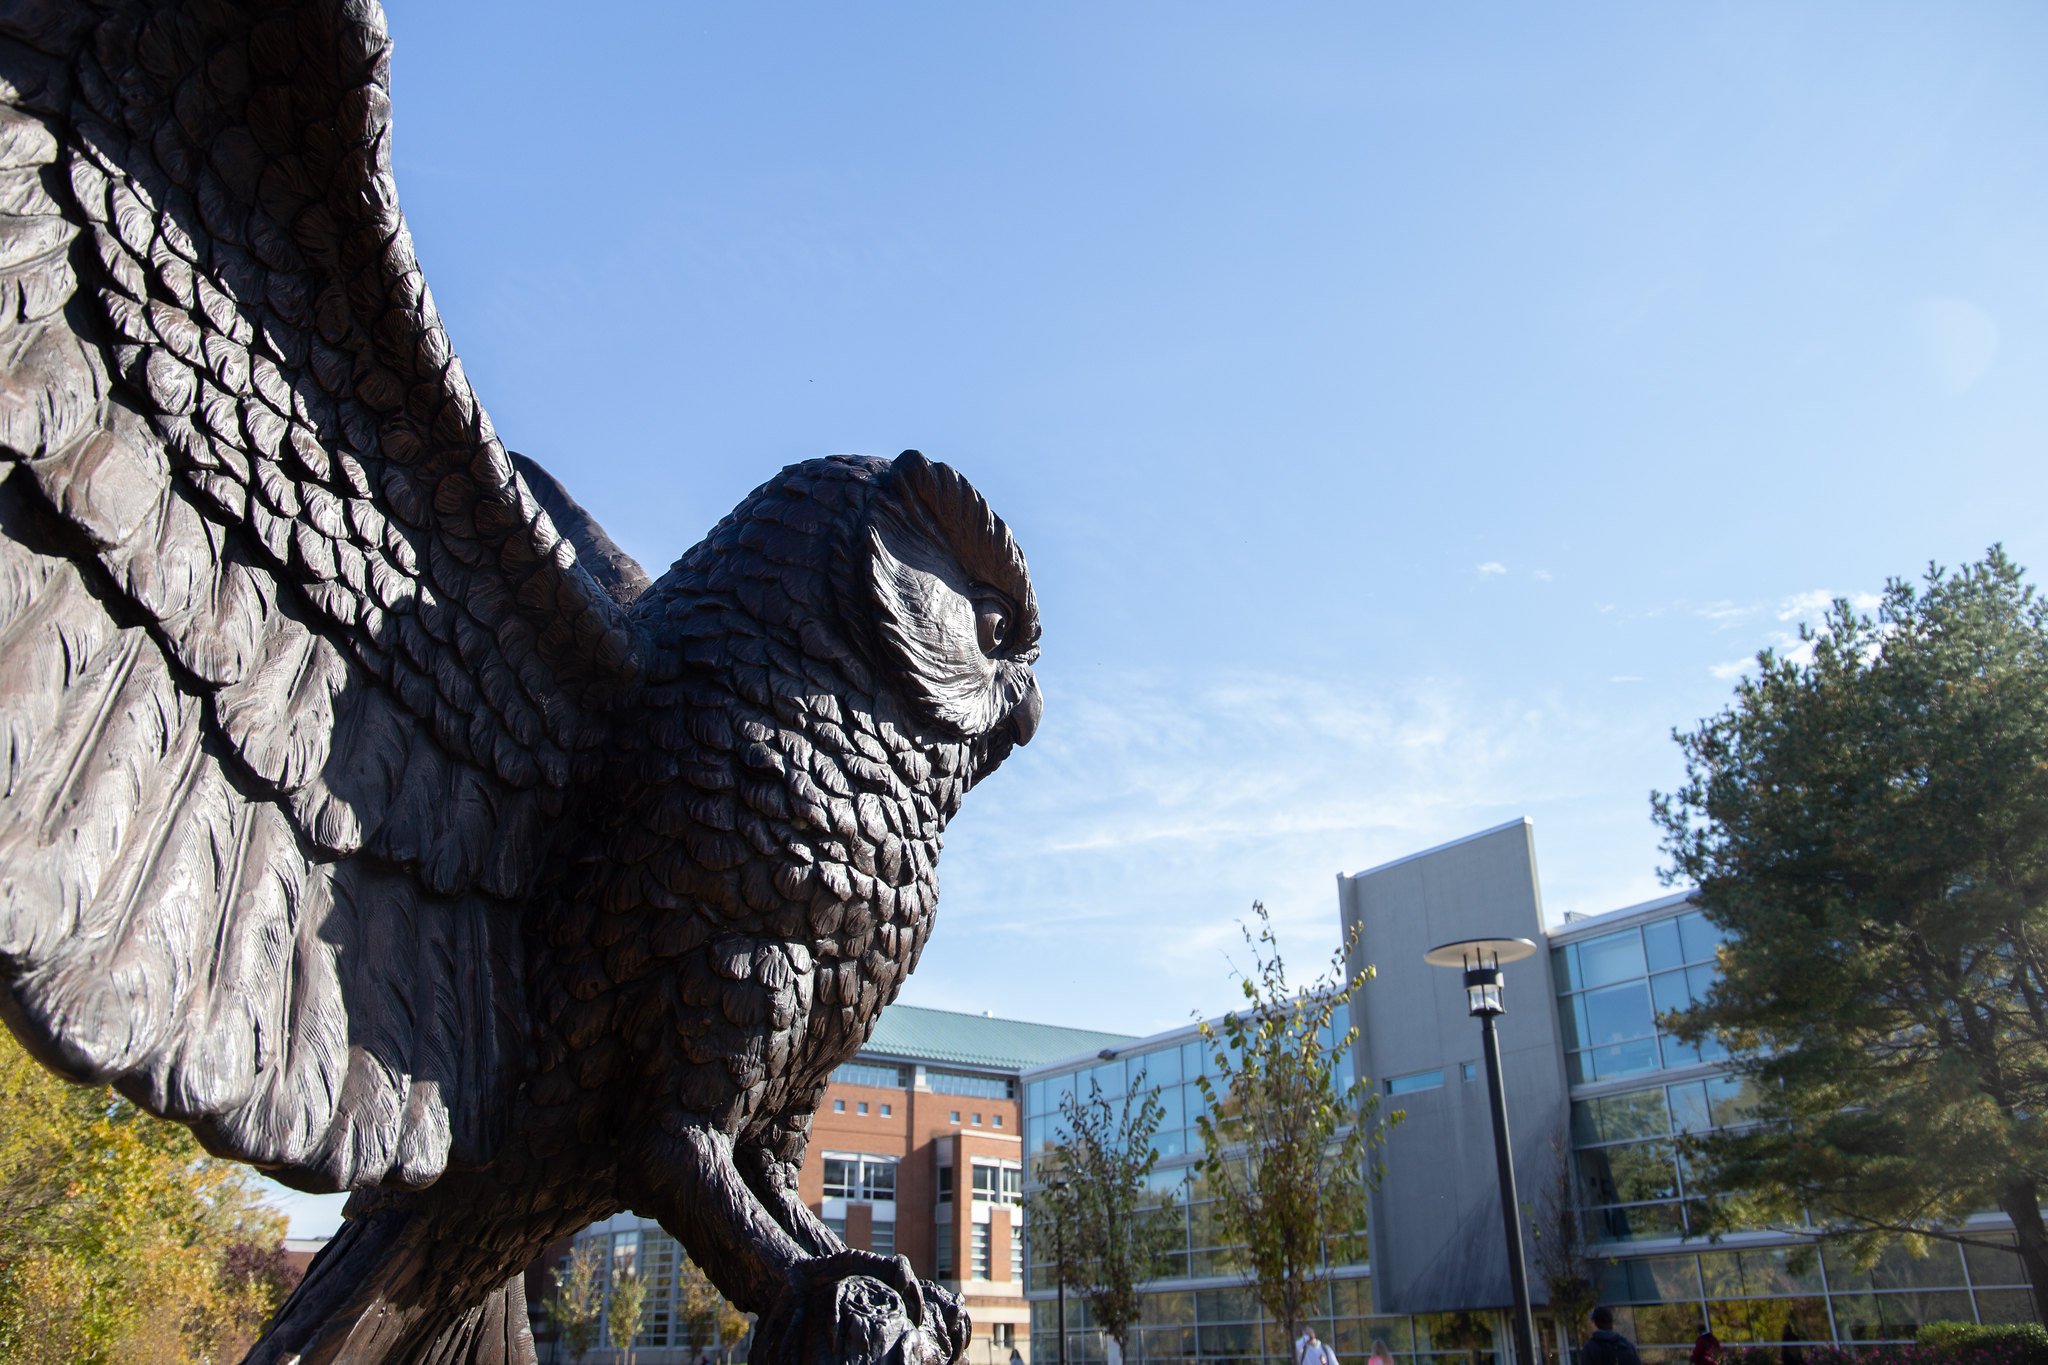 Rowan mascot owl statue overlooking campus with blue sky in background